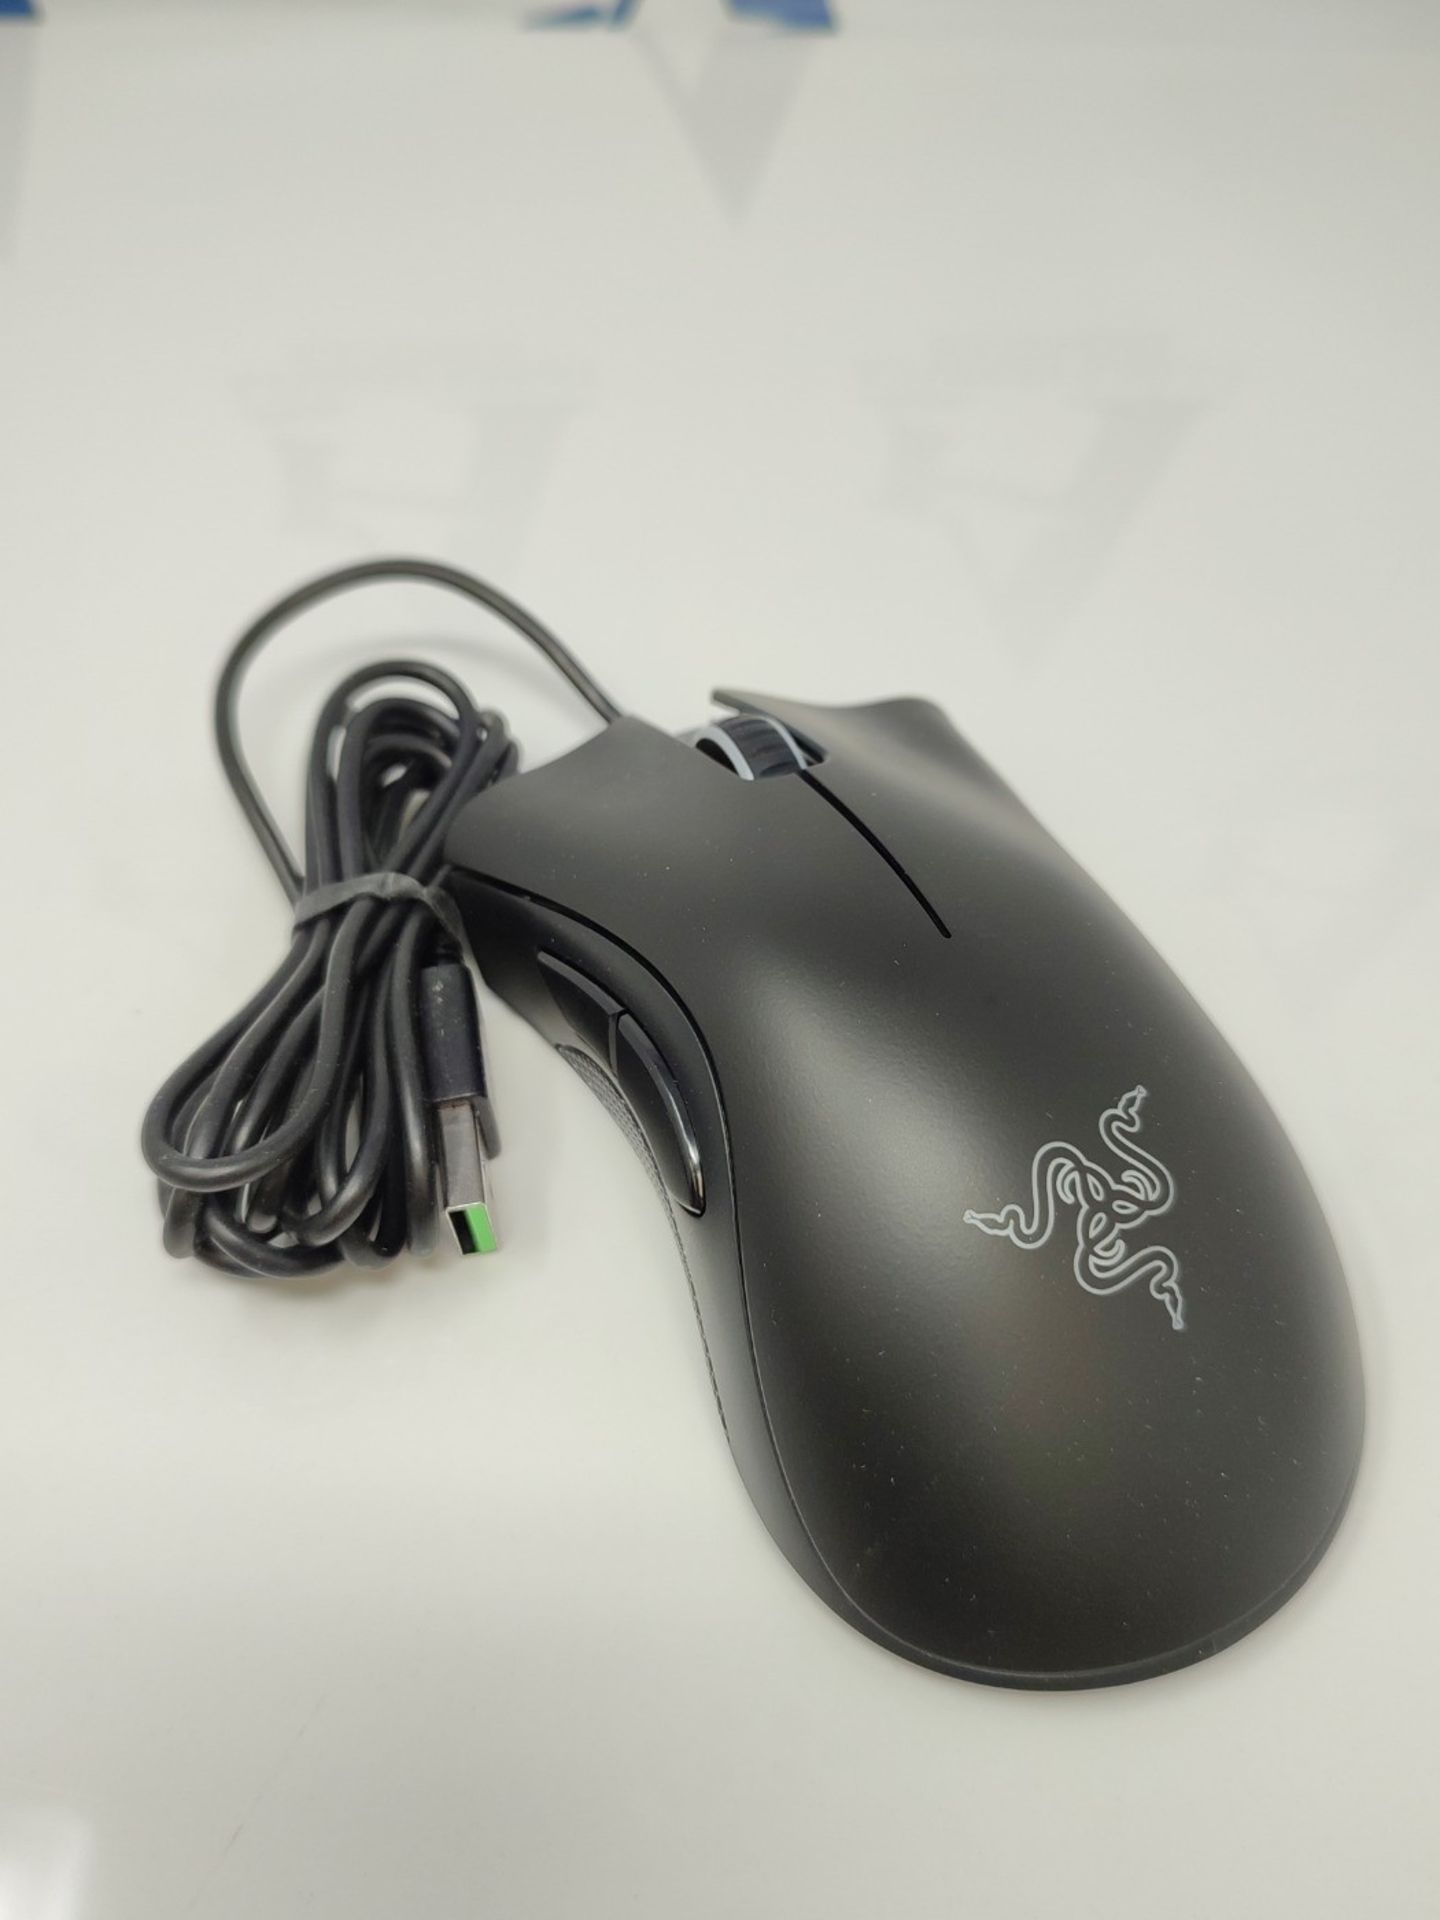 Razer DeathAdder Essential (2021) - Wired Gaming Mouse with 6400 DPI Optical Sensor (E - Image 3 of 3